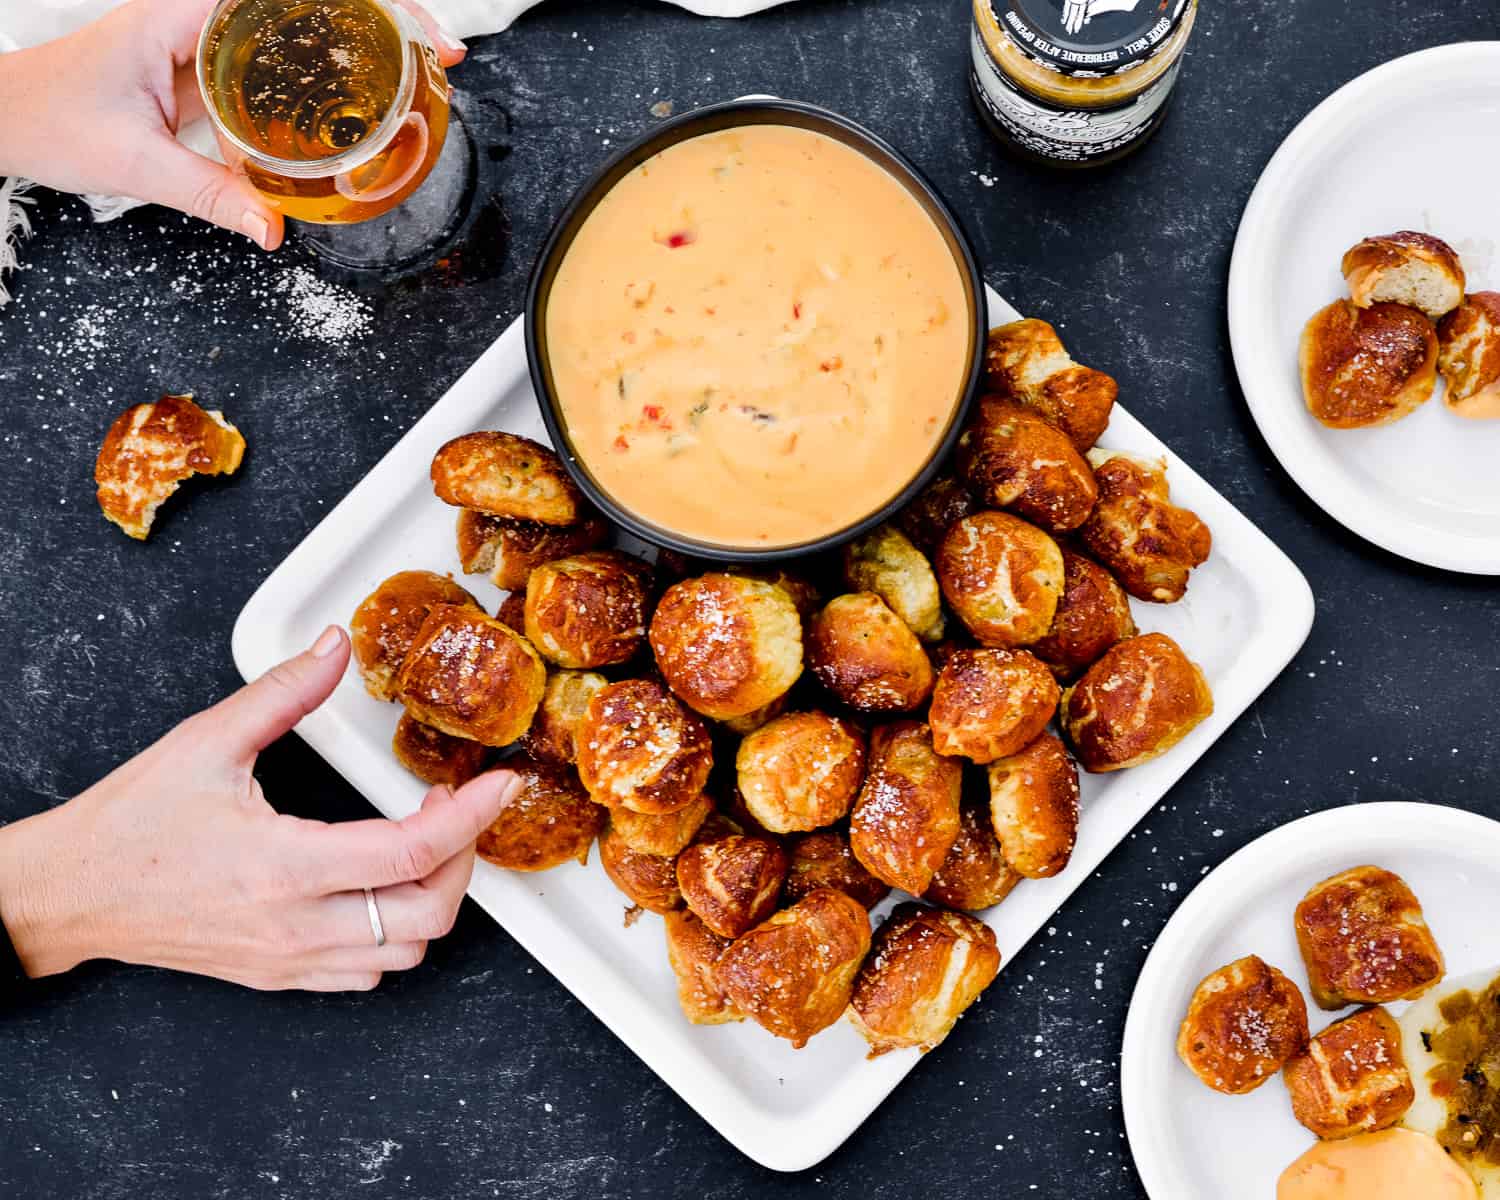 hand reaching for pretzel bite with queso dip on the side.